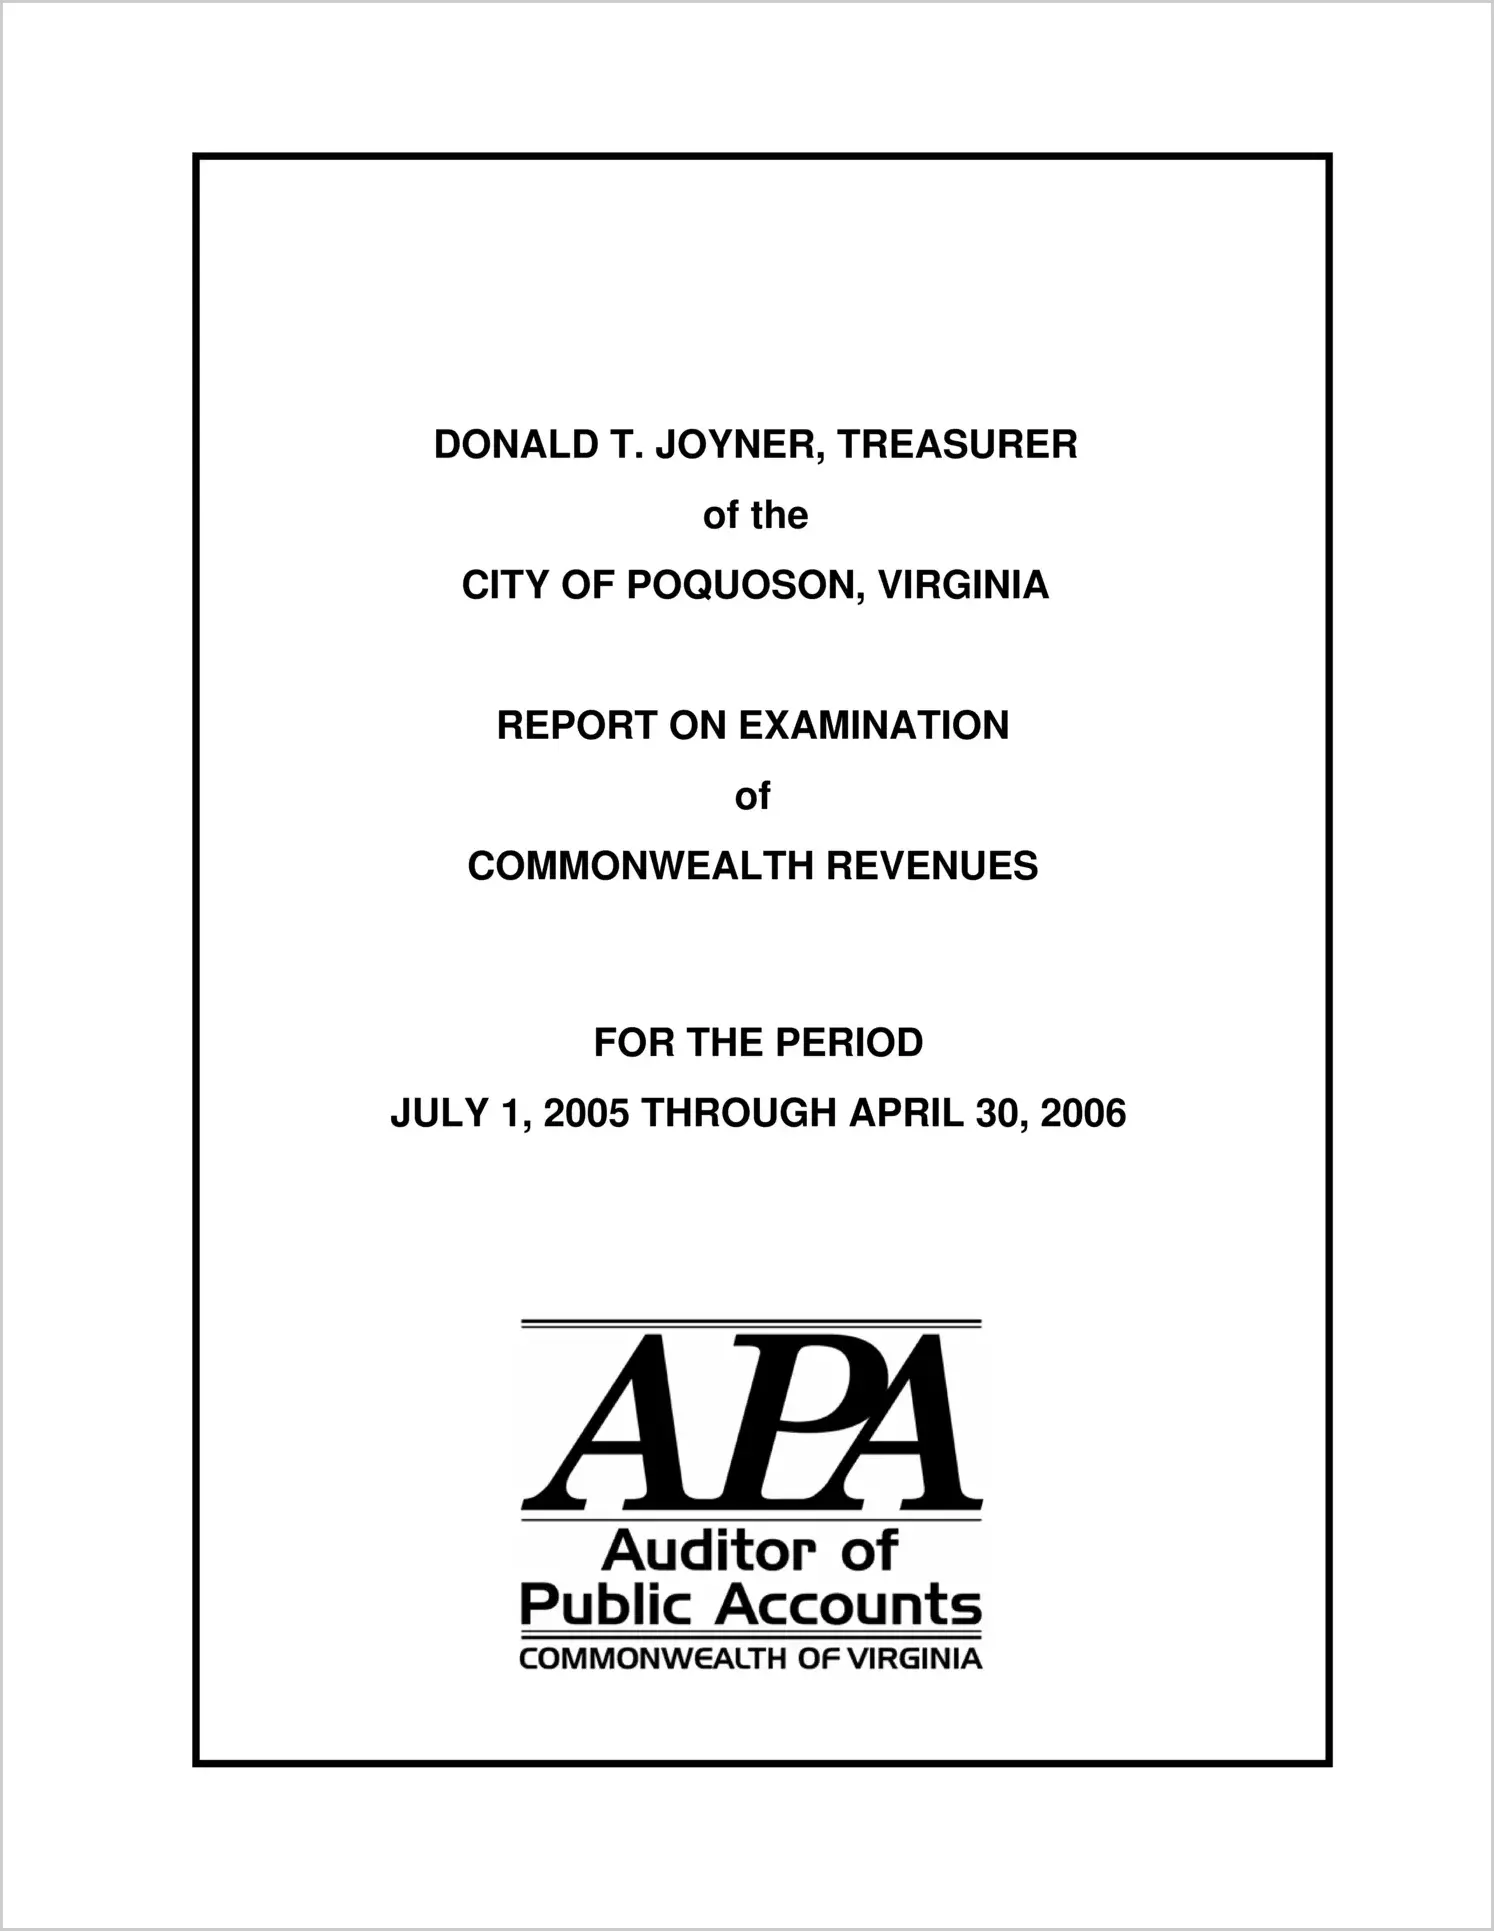 Report on Examination of Commonwealth Revenues and the Treasurers Accountability to the City of Poquoson for the period July 1, 2005 through April 30, 2006